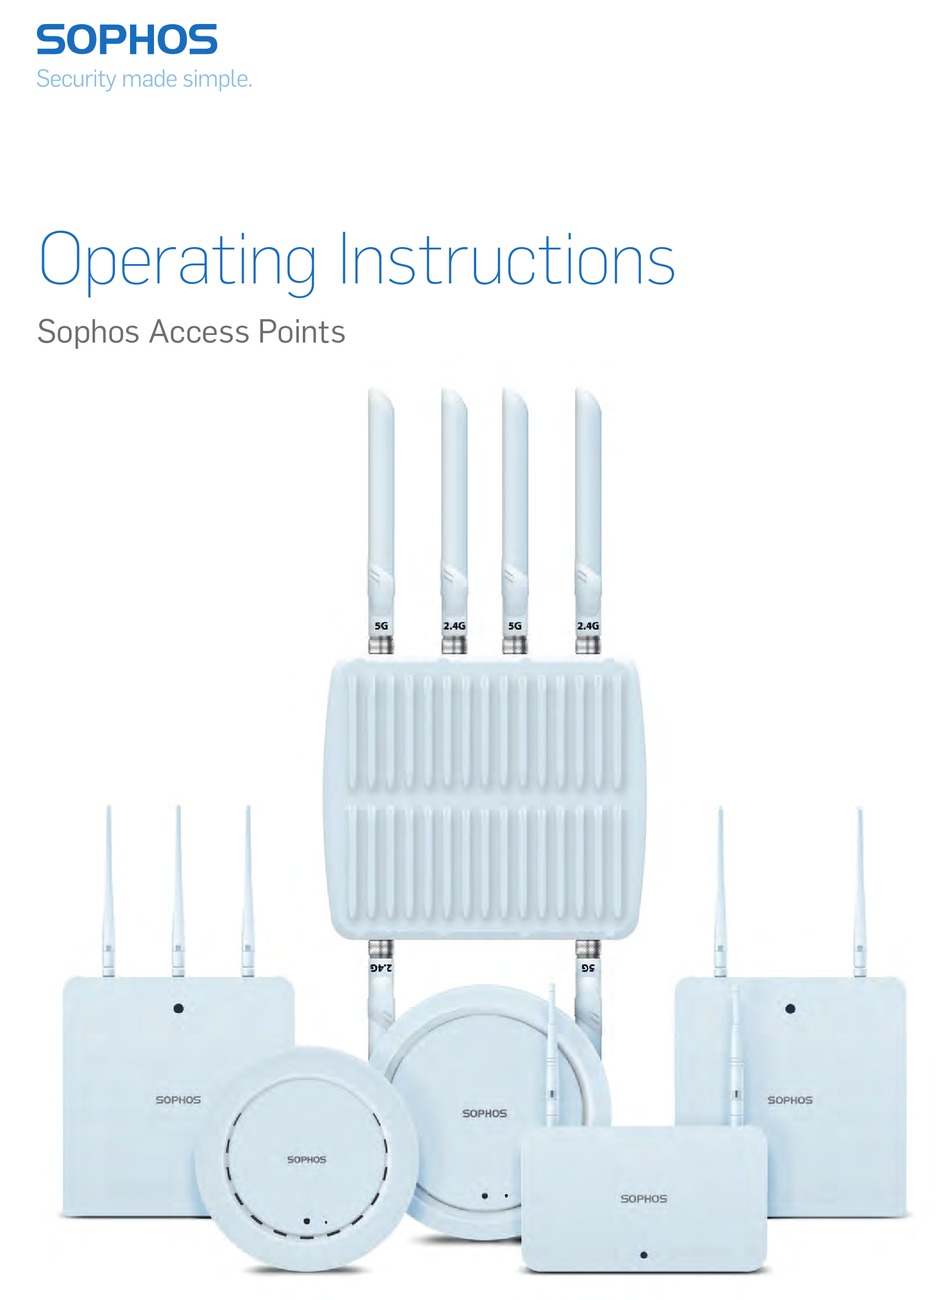 Sophos Apx 320 Access Point